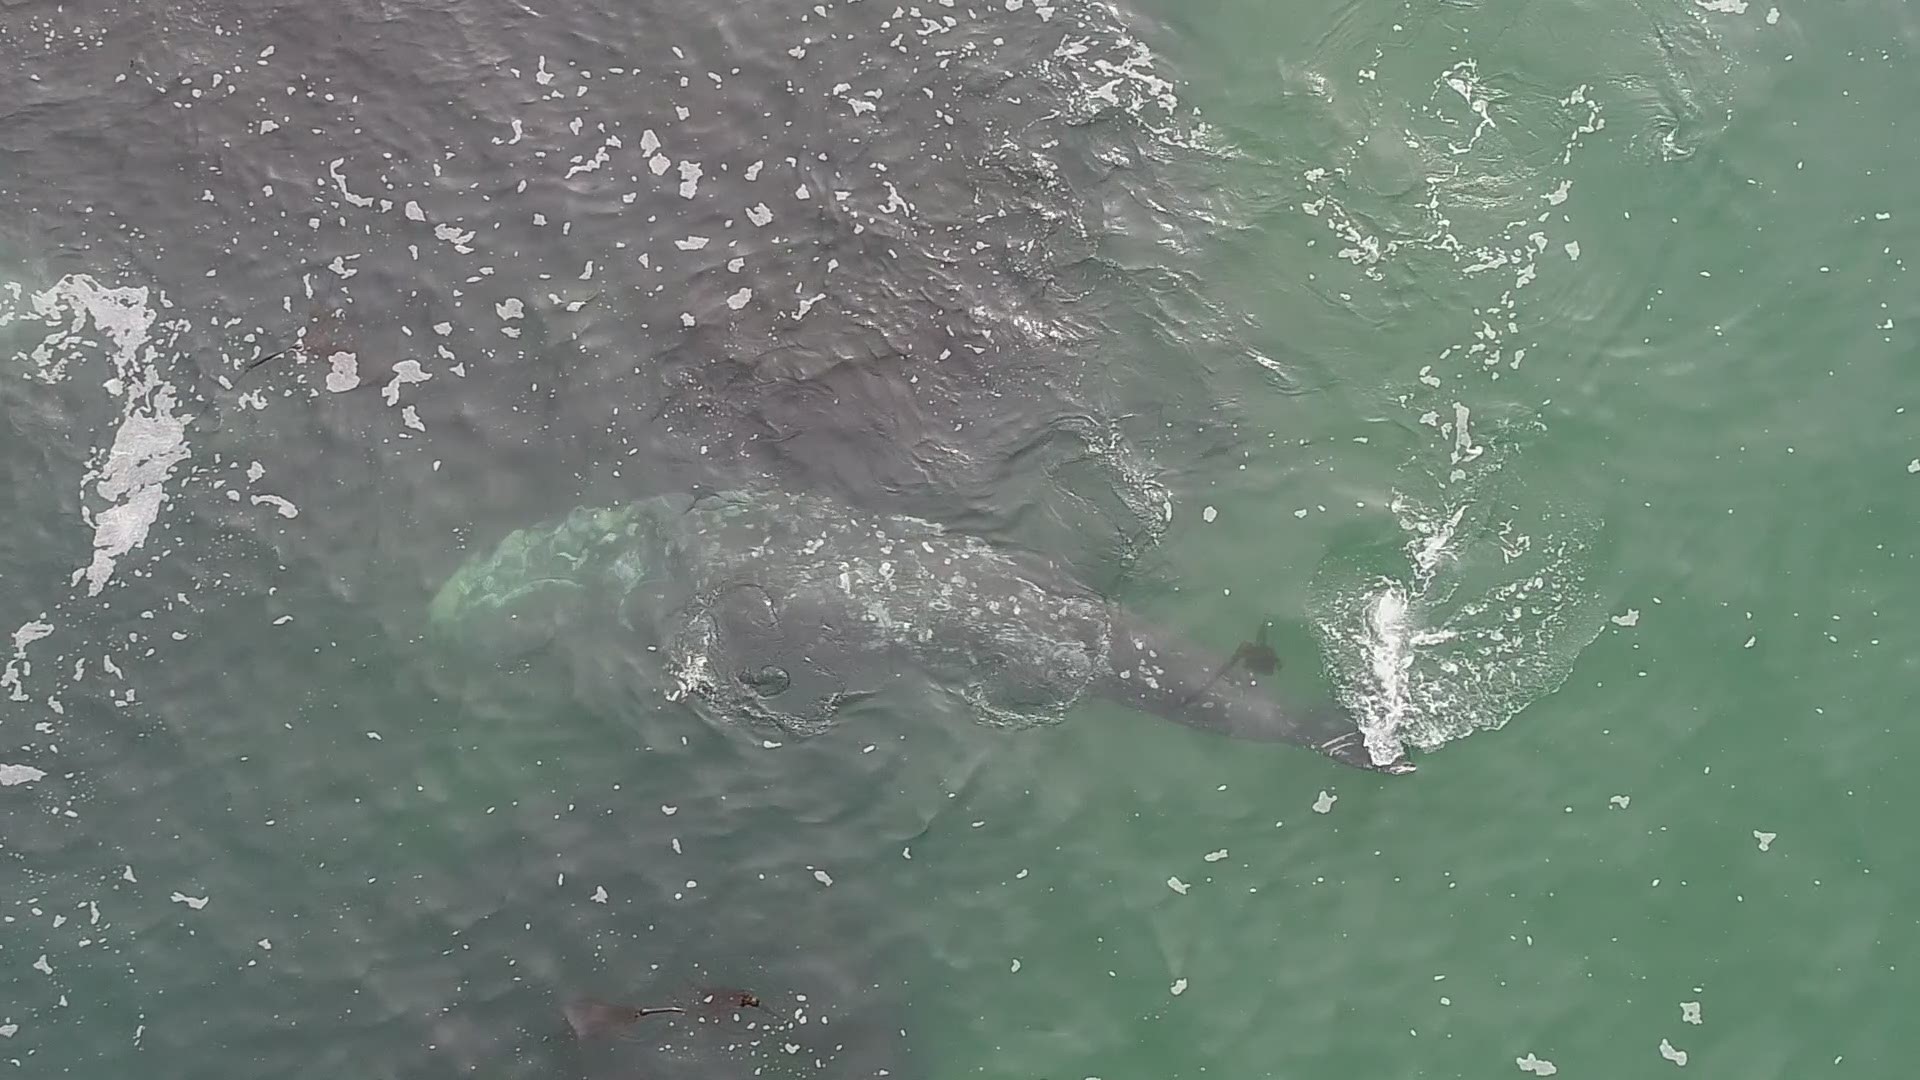 OSU researchers are observing whales from above with drones.